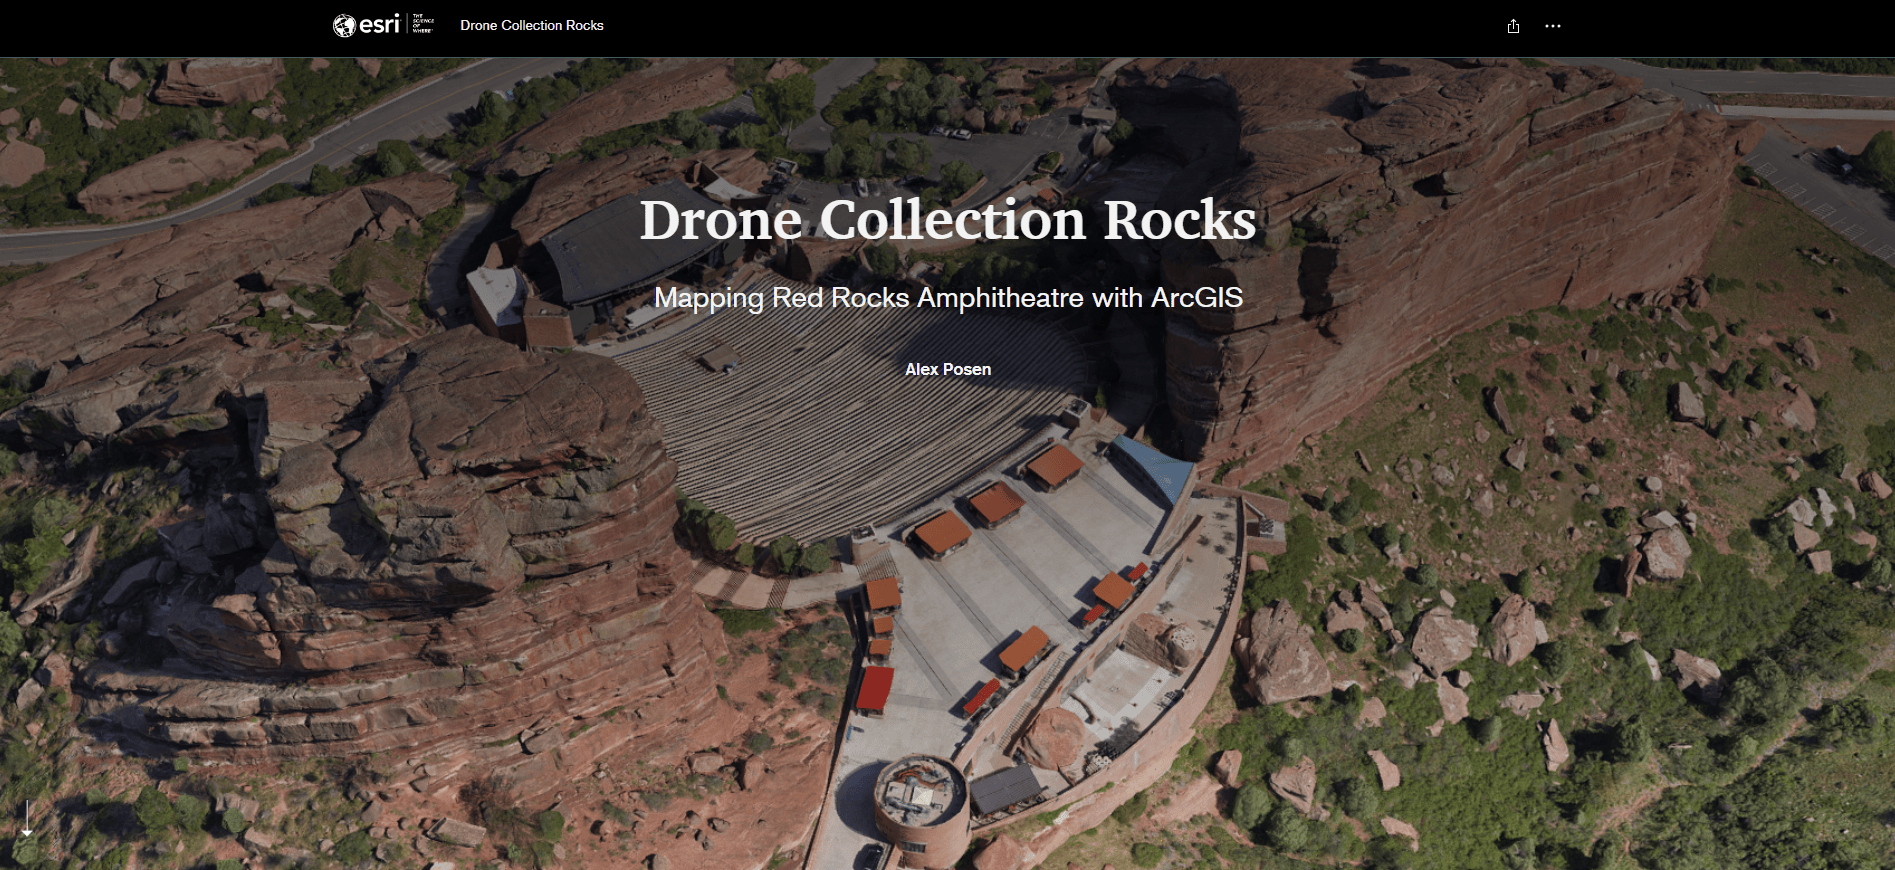 A screen shot of a 3D mesh and the words Drone Collection Rocks Mapping Red Rocks Ampitheatre with ArcGIS by Alex Posen